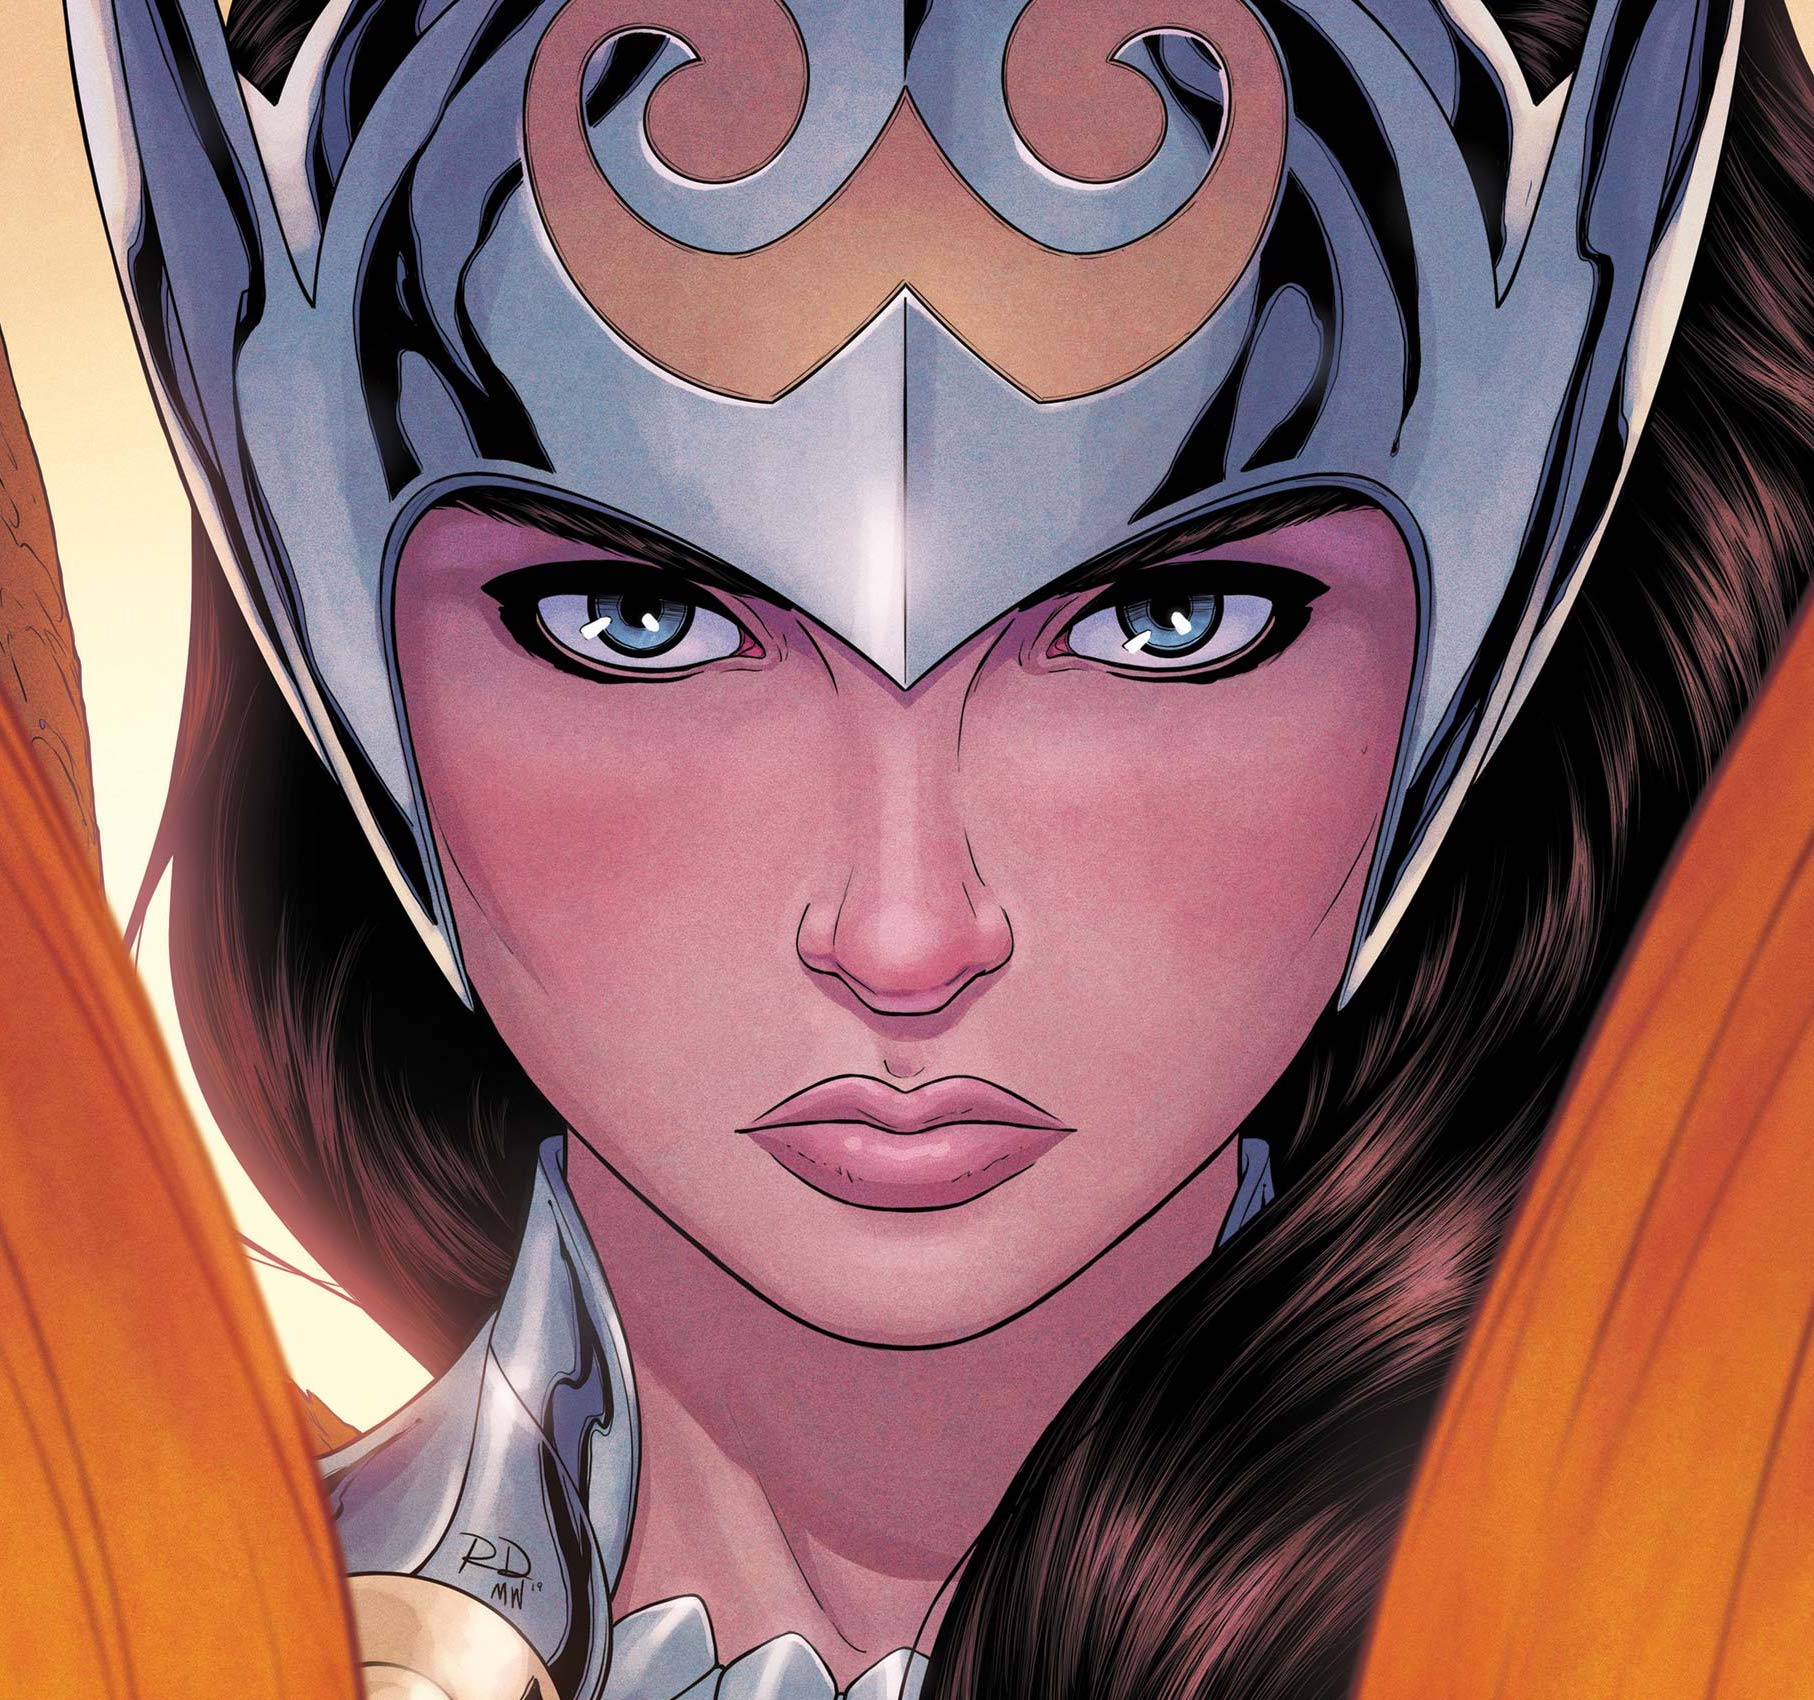 'Jane Foster: The Saga of Valkyrie' is an epic tale of death and rebirth